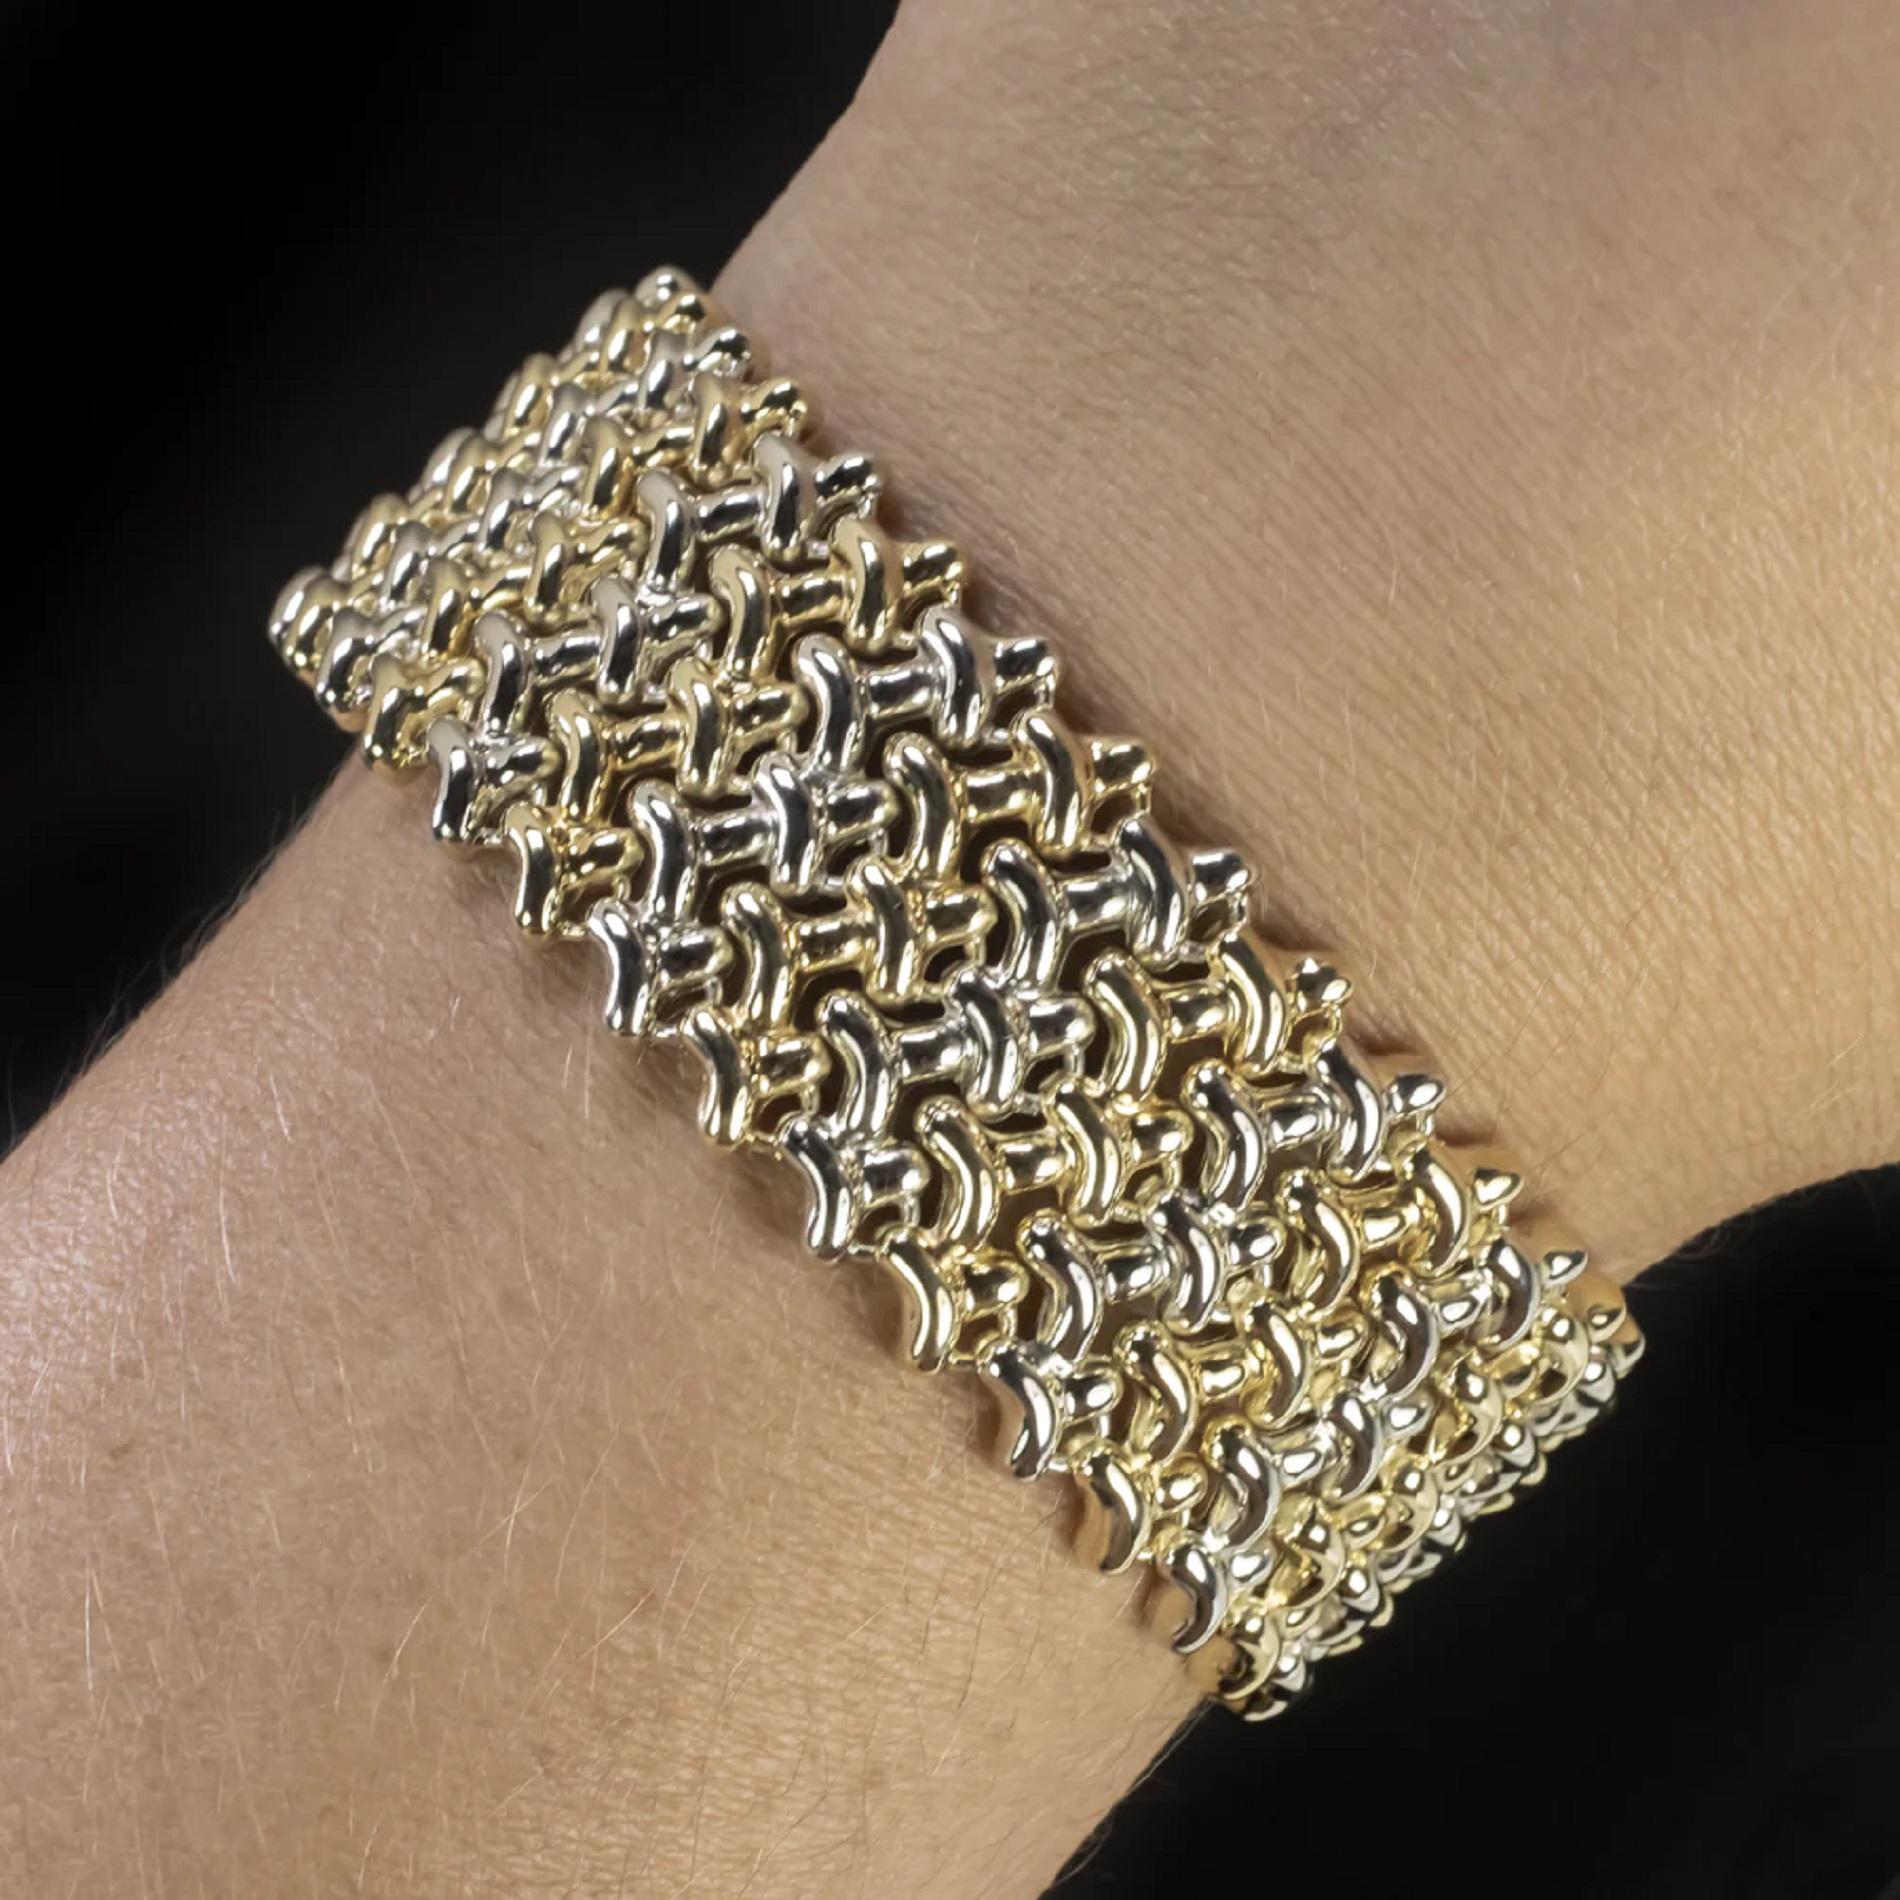 This 18k bracelet offers a versatile look with two tone links on one side and all yellow gold on the other. This designer piece is made by Chimento 

- Solid 18k yellow and white gold

- Chunky two tone links

- Very substantial and luxurious feel,